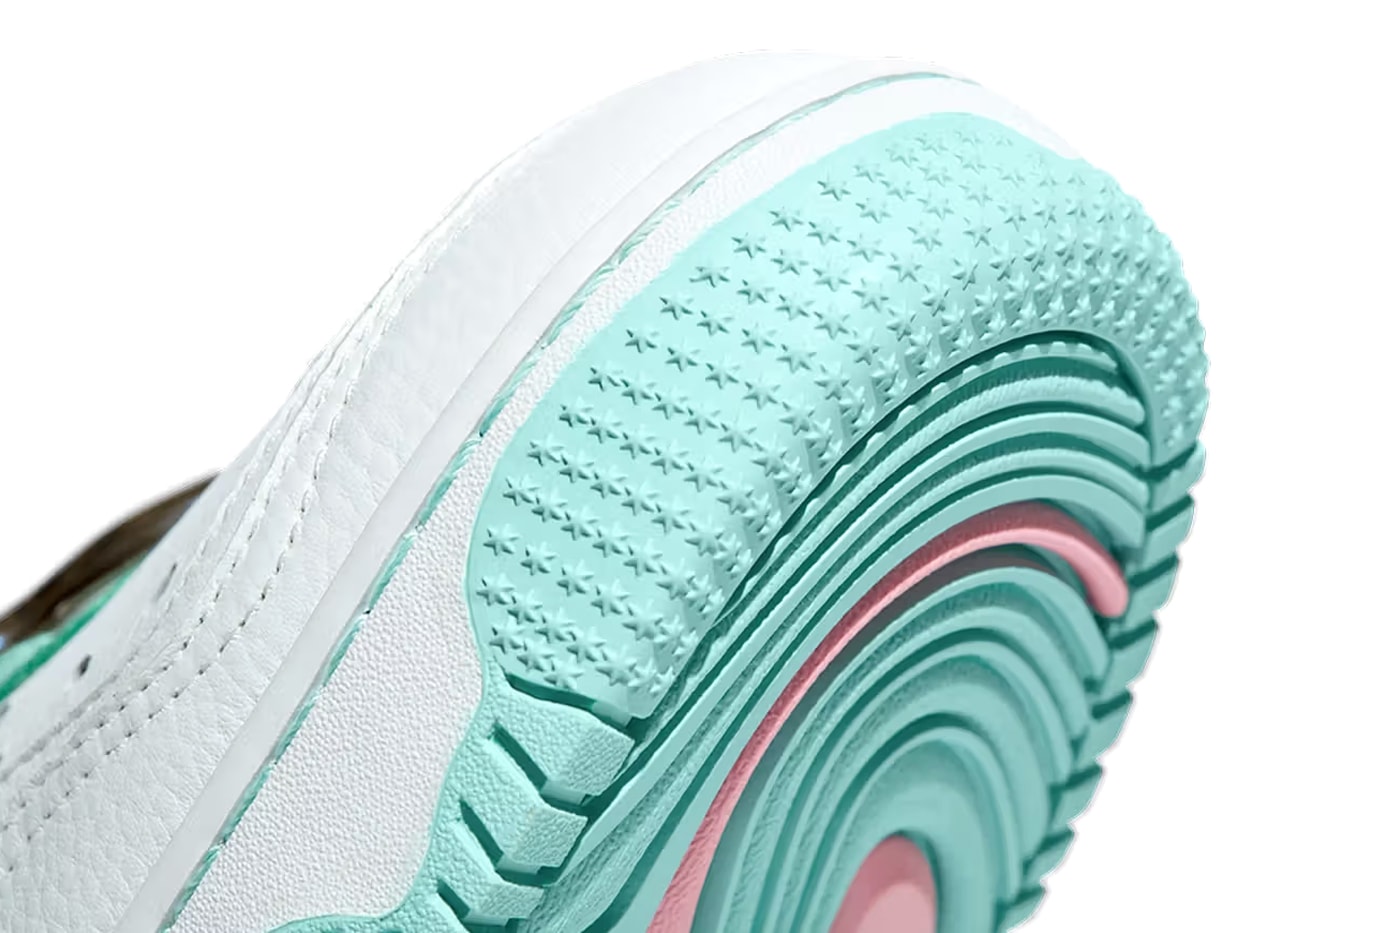 On feet Look MSCHF Super Normal 2 “White Mint” images sneakers footwear hype official images release